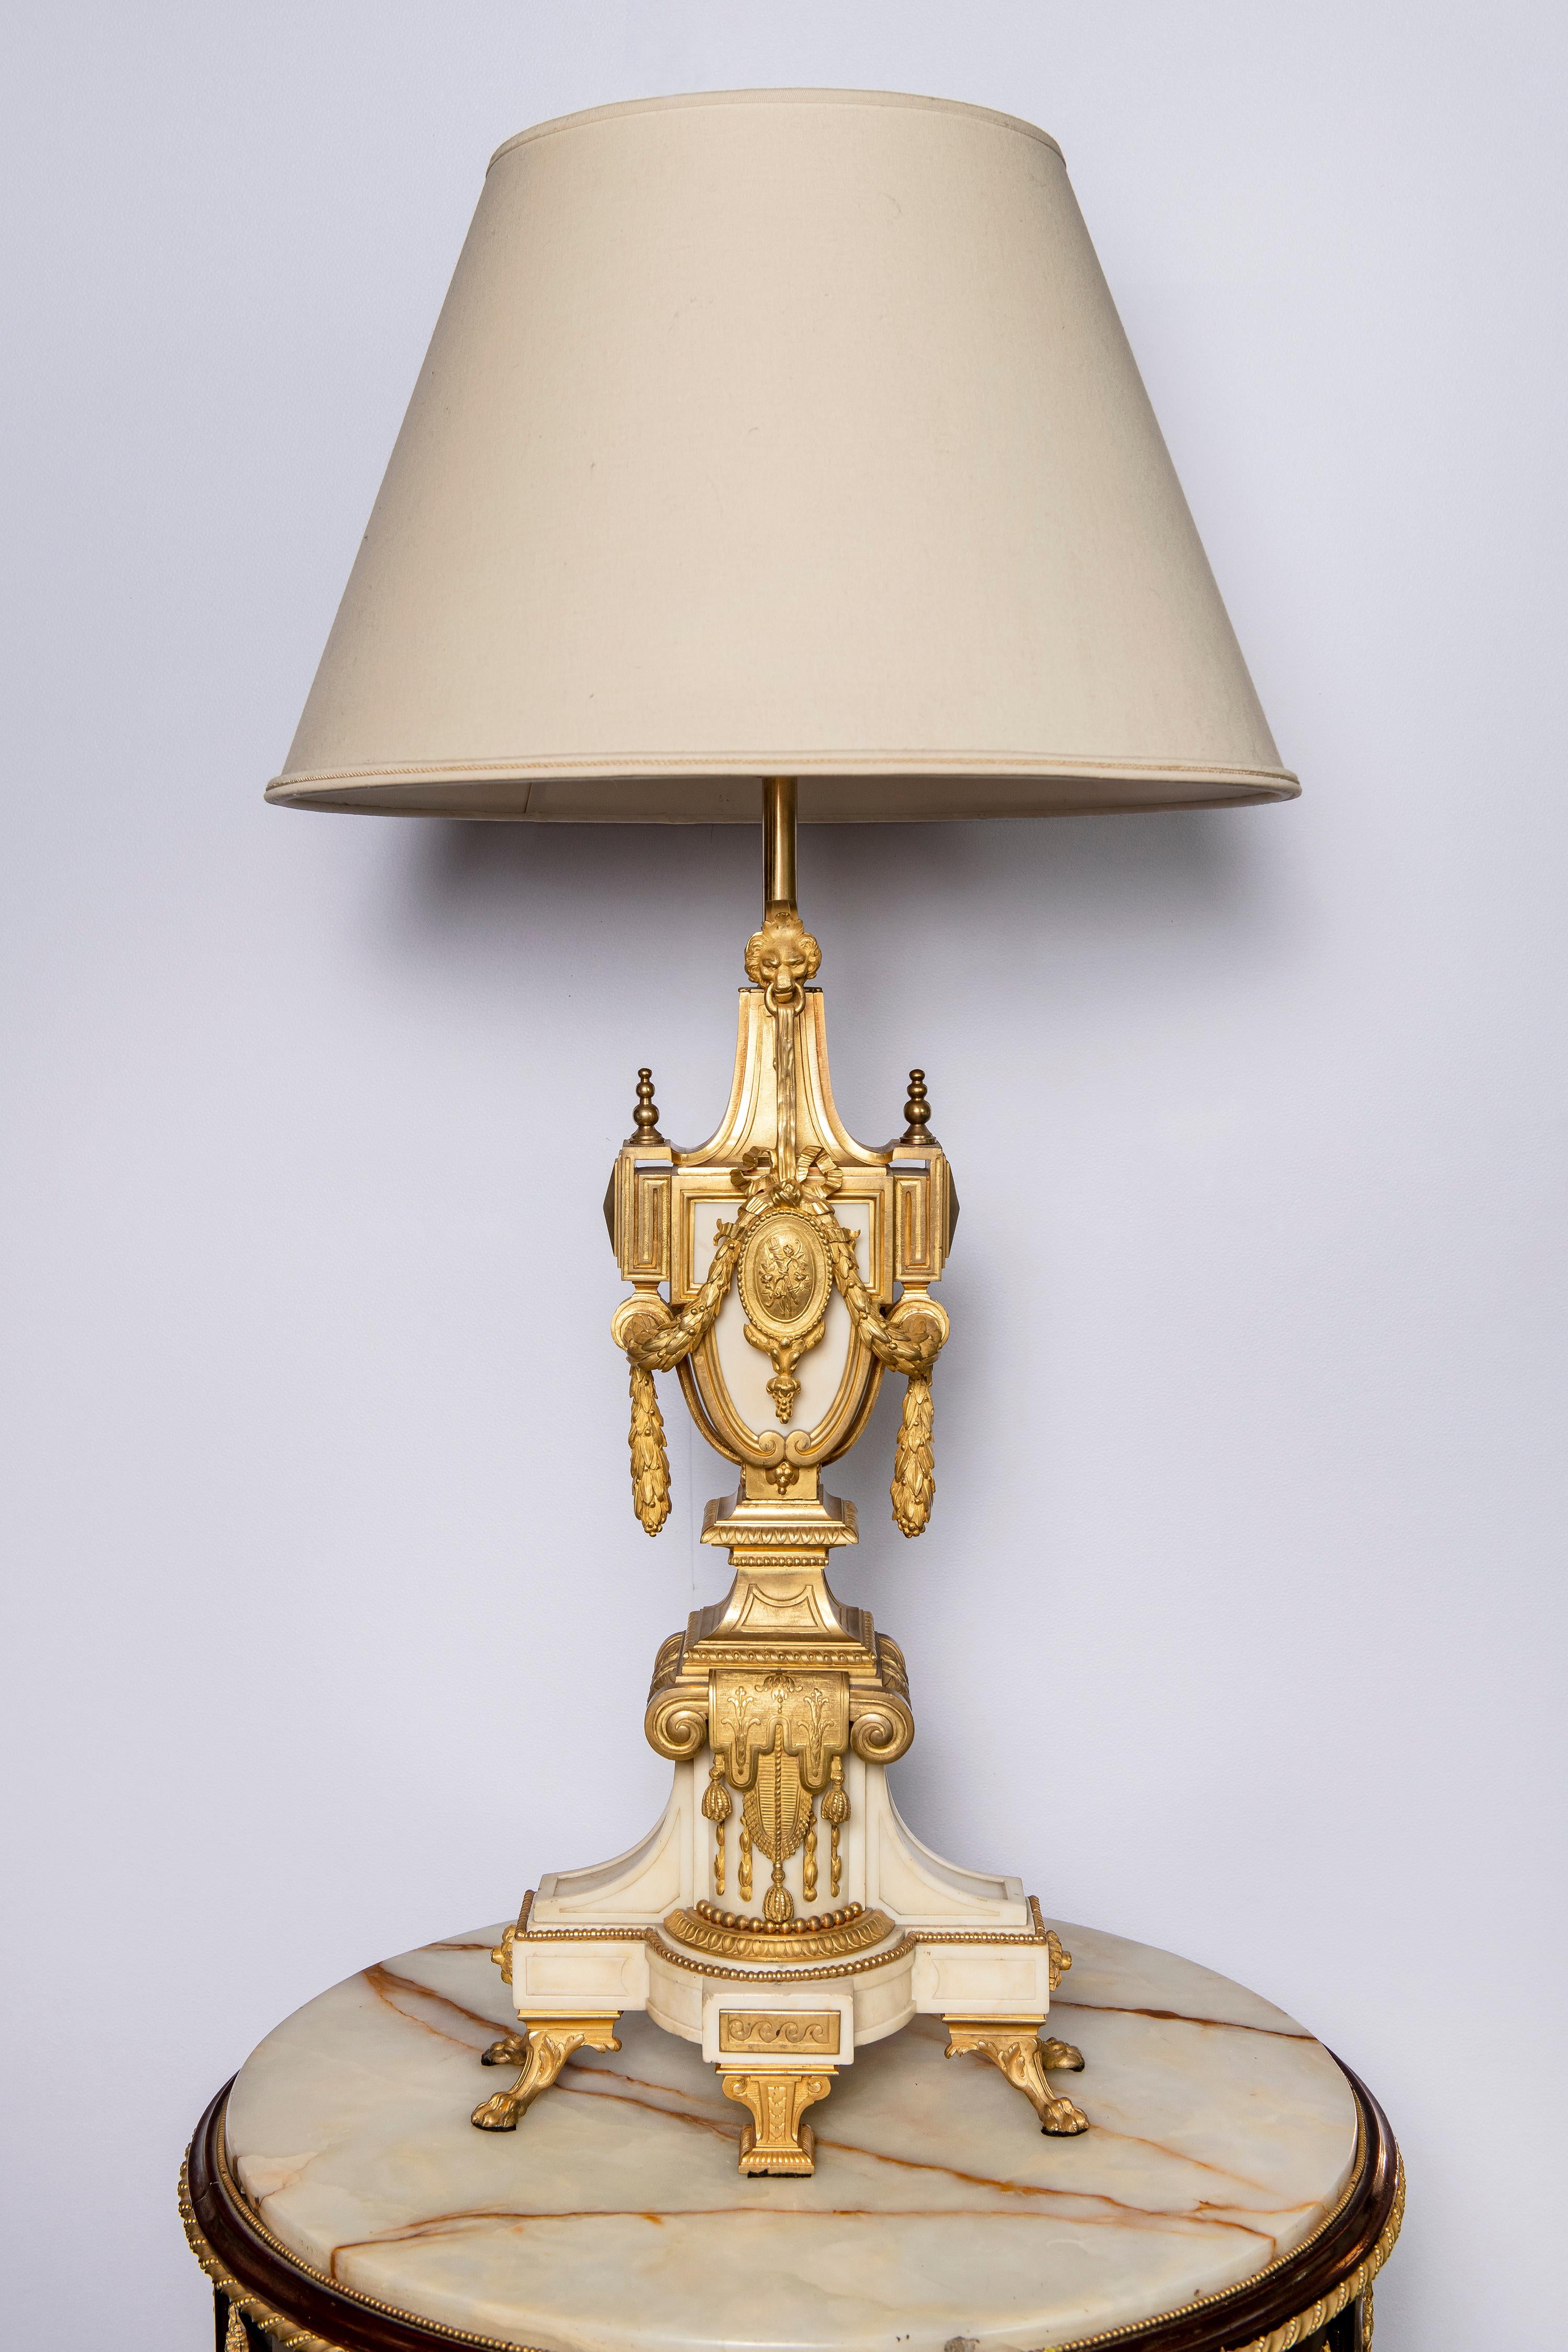 Pair of marble and gilt bronze table lamps, signed F. Barbedienne. France, circa 1880-1890.
The dimensions are without the shade.